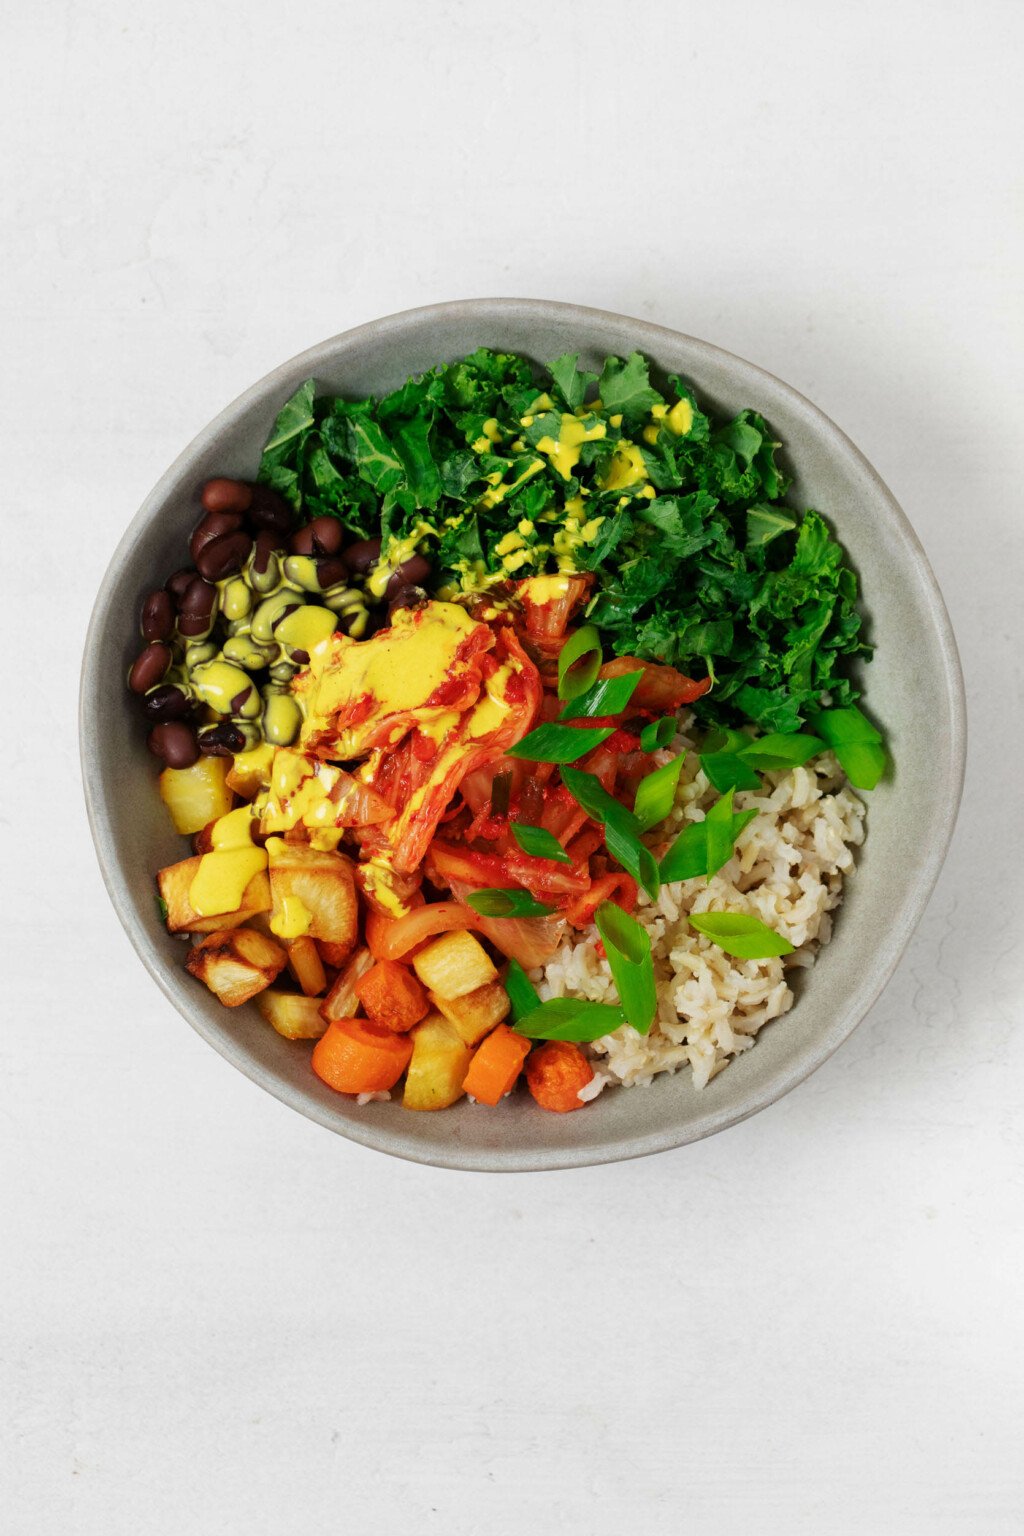 A vegan breakfast macro bowl has been topped with a bright yellow-hued sauce. The bowl is resting on a white surface.